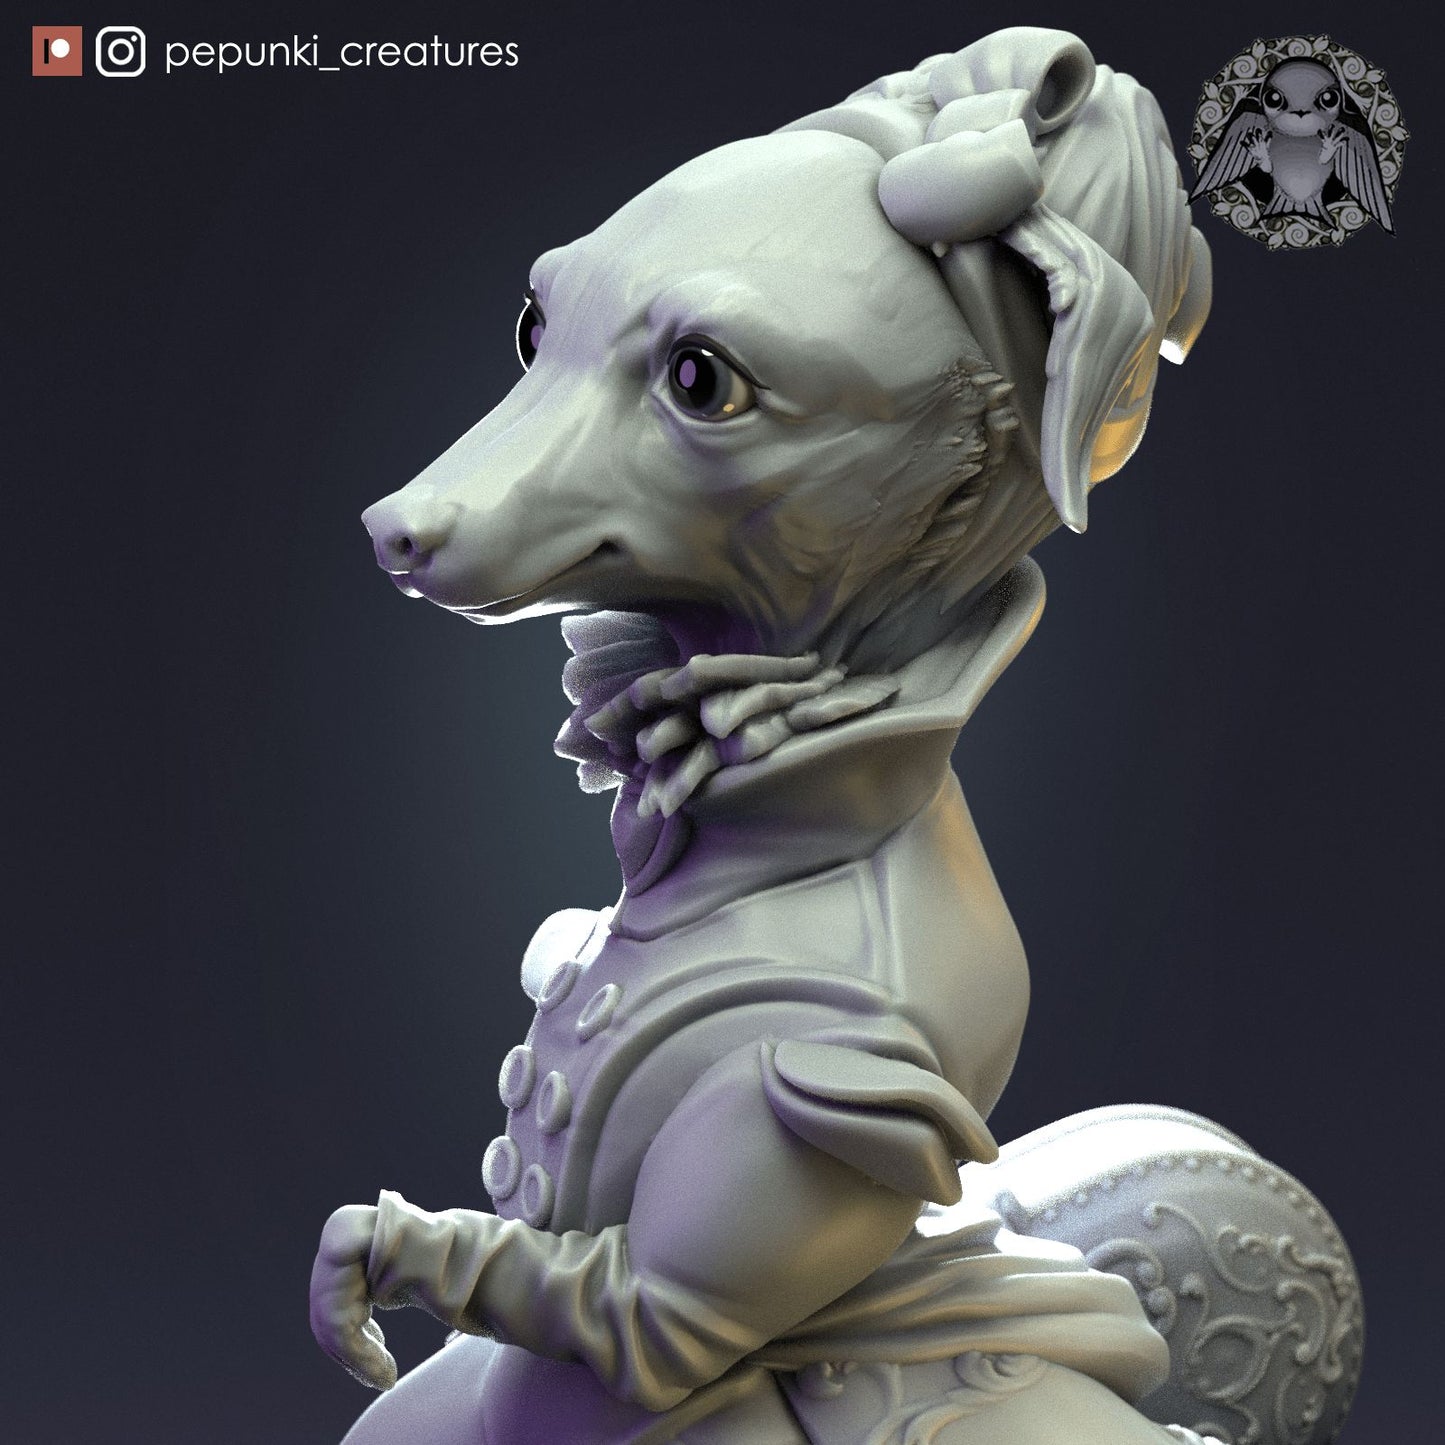 Italian Greyhound Lady | Dungeons and Dragons Tabletop Roleplaying Game Miniature | Pepunki Miniatures - Tattles Told 3D